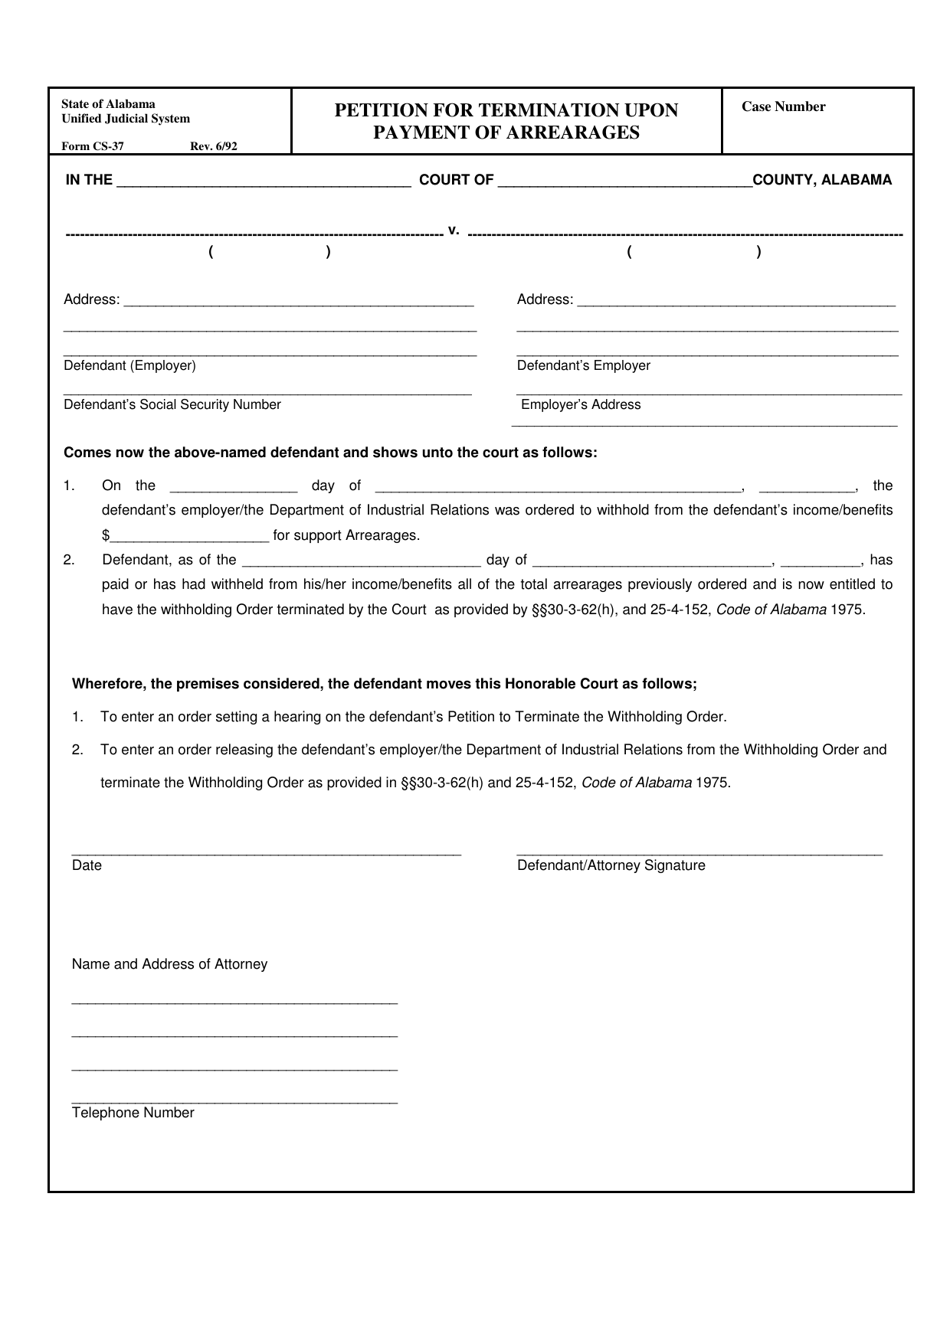 Form CS-37 Petition for Termination Upon Payment of Arrearages - Alabama, Page 1